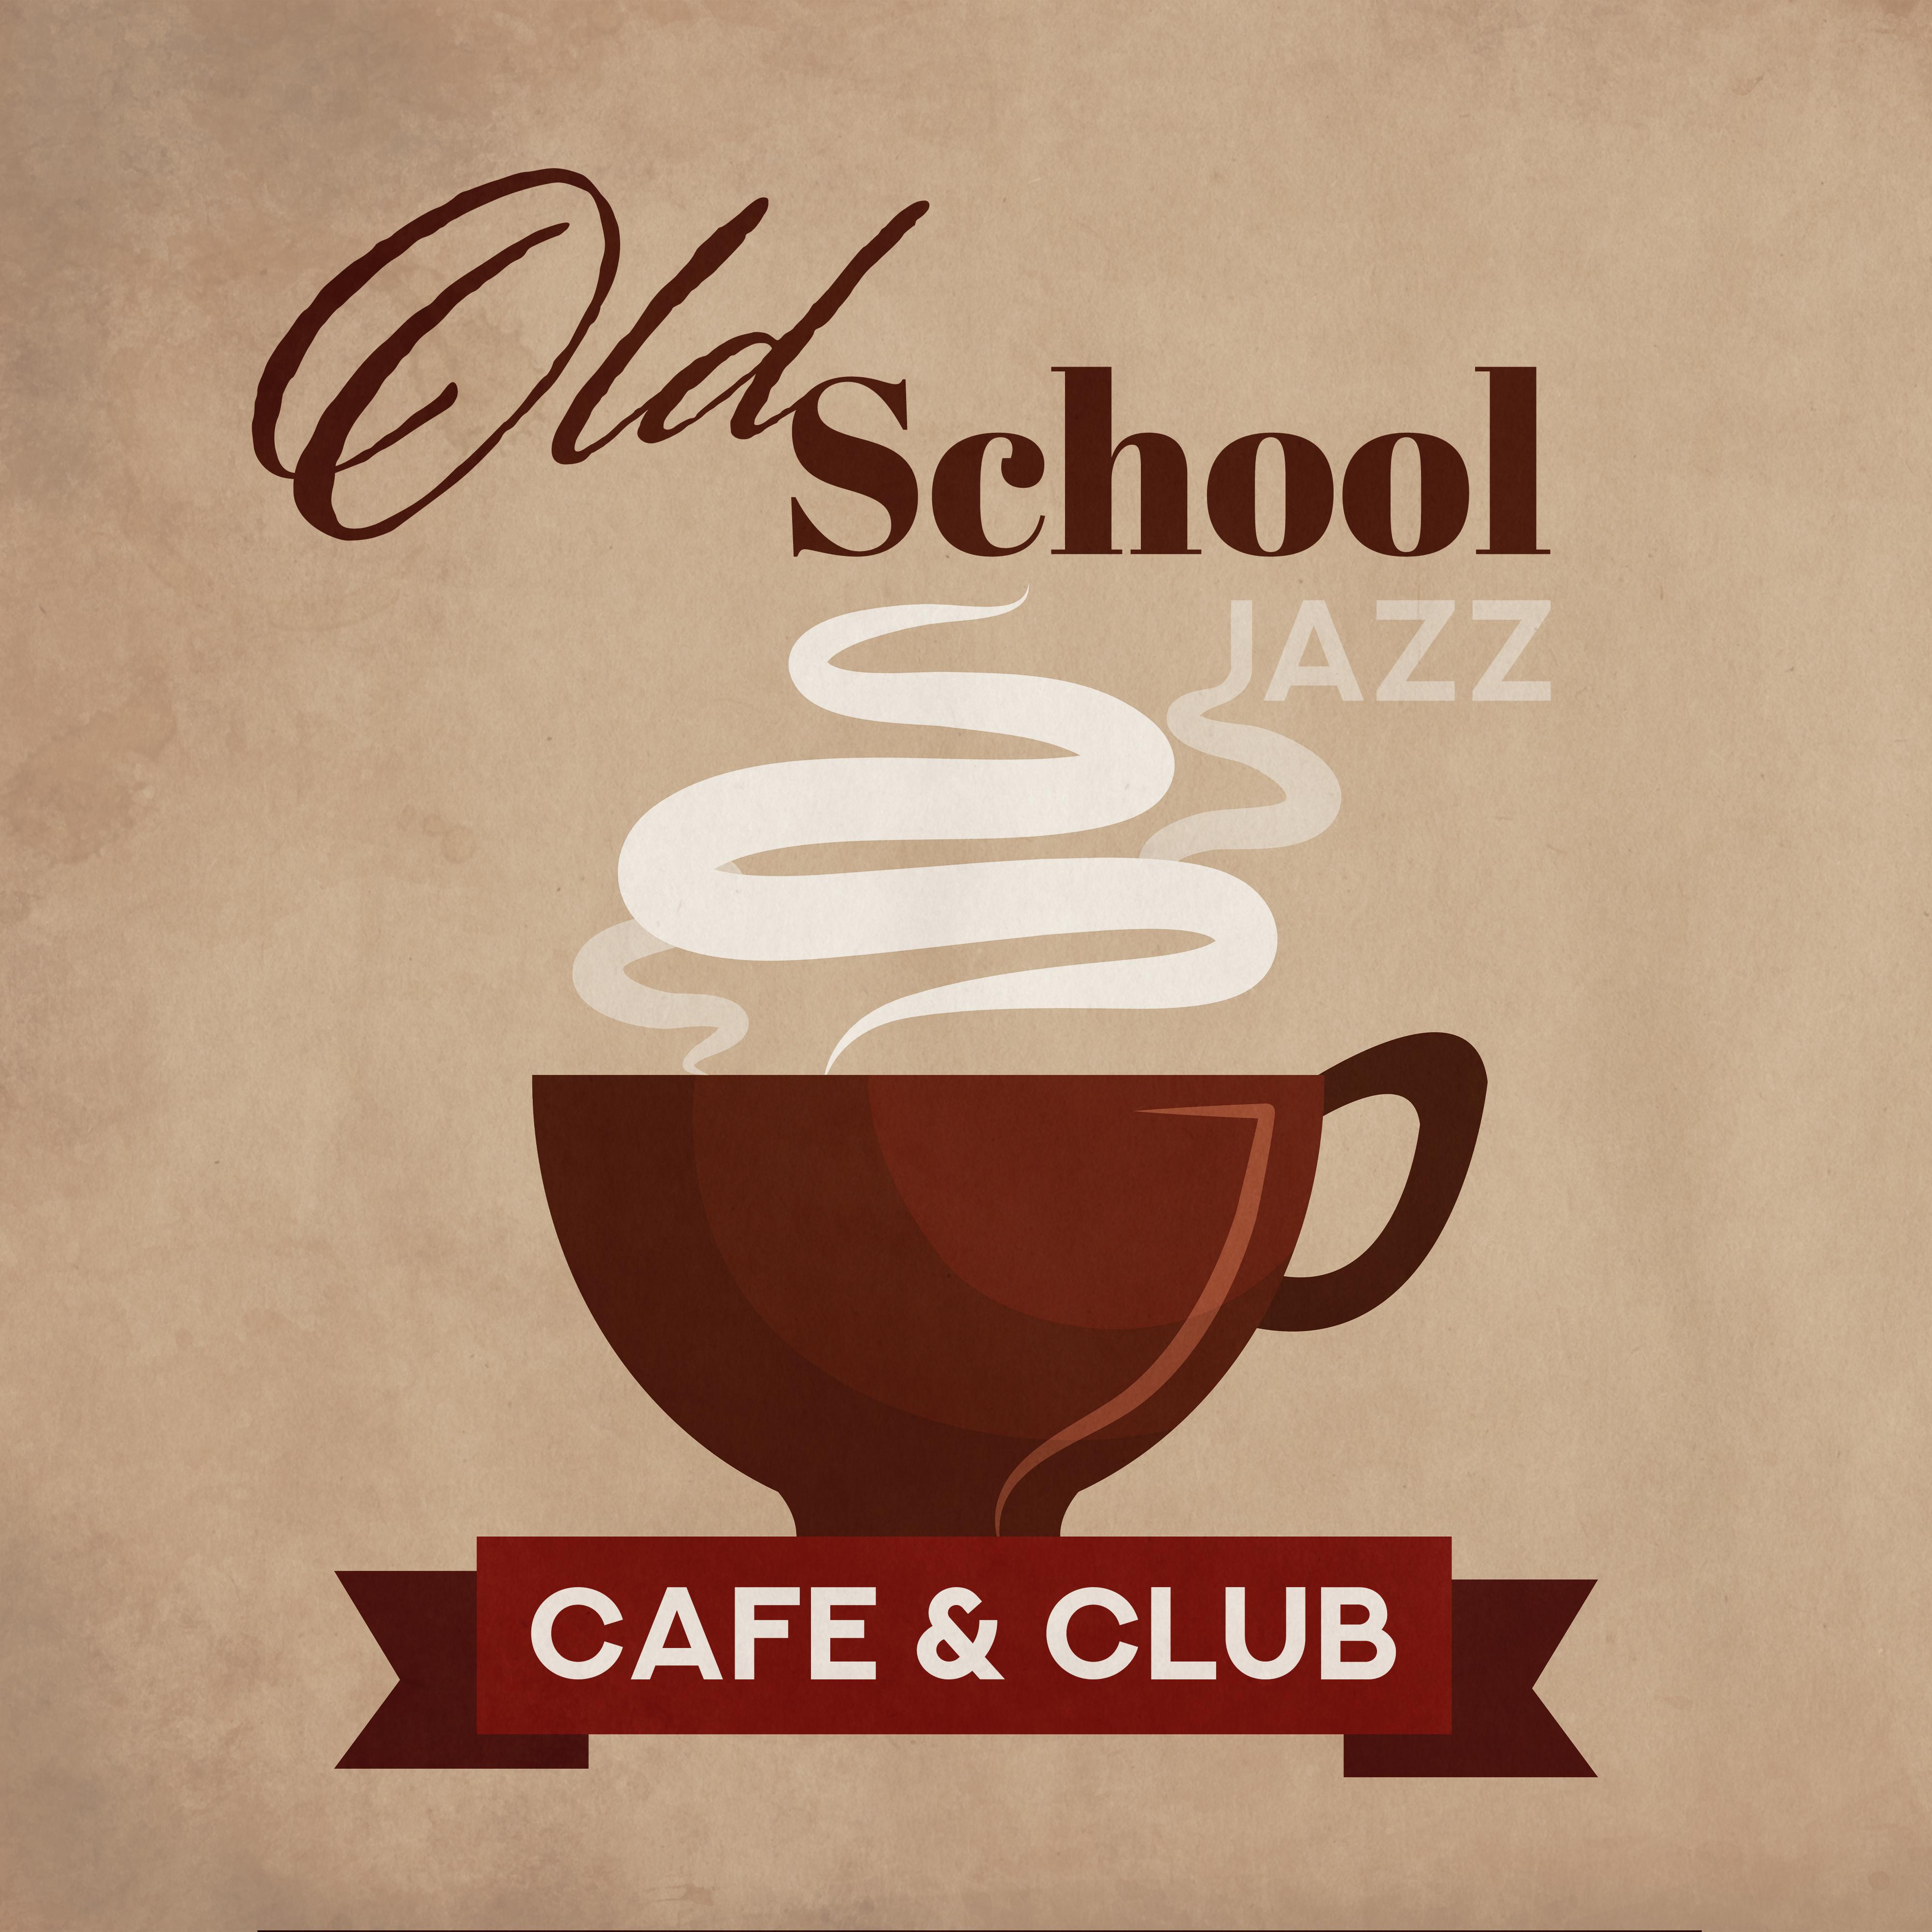 Old School Jazz Cafe & Club: Collection of Best Vintage Style Smooth Jazz Music, Perfect Background for Friends Meeting in the Cafe or Swing Dance in the Club